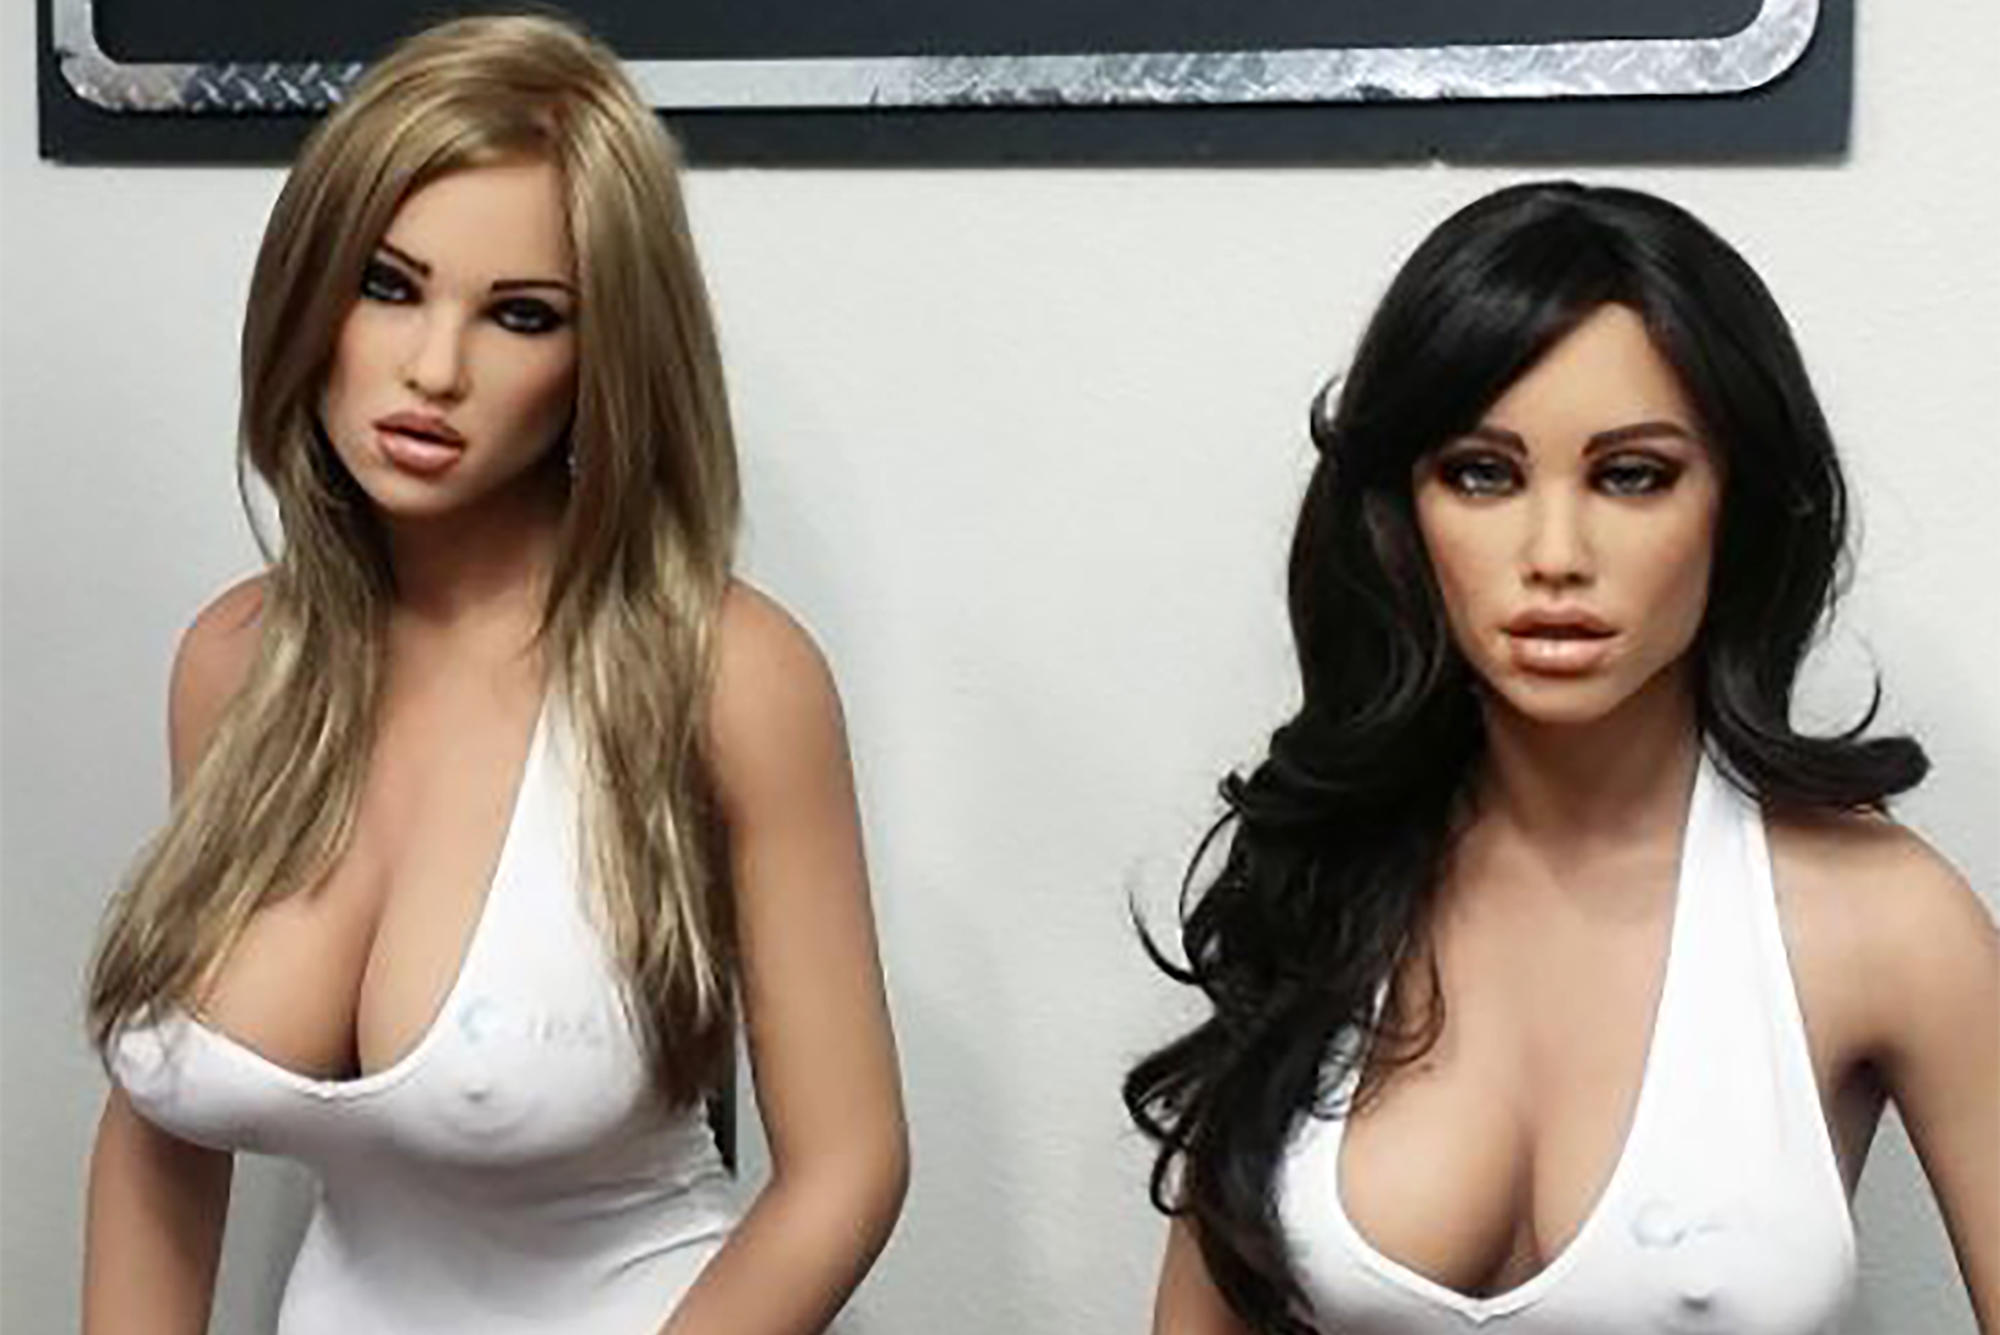 Sex robot makers claim lonely customers are marrying their dolls